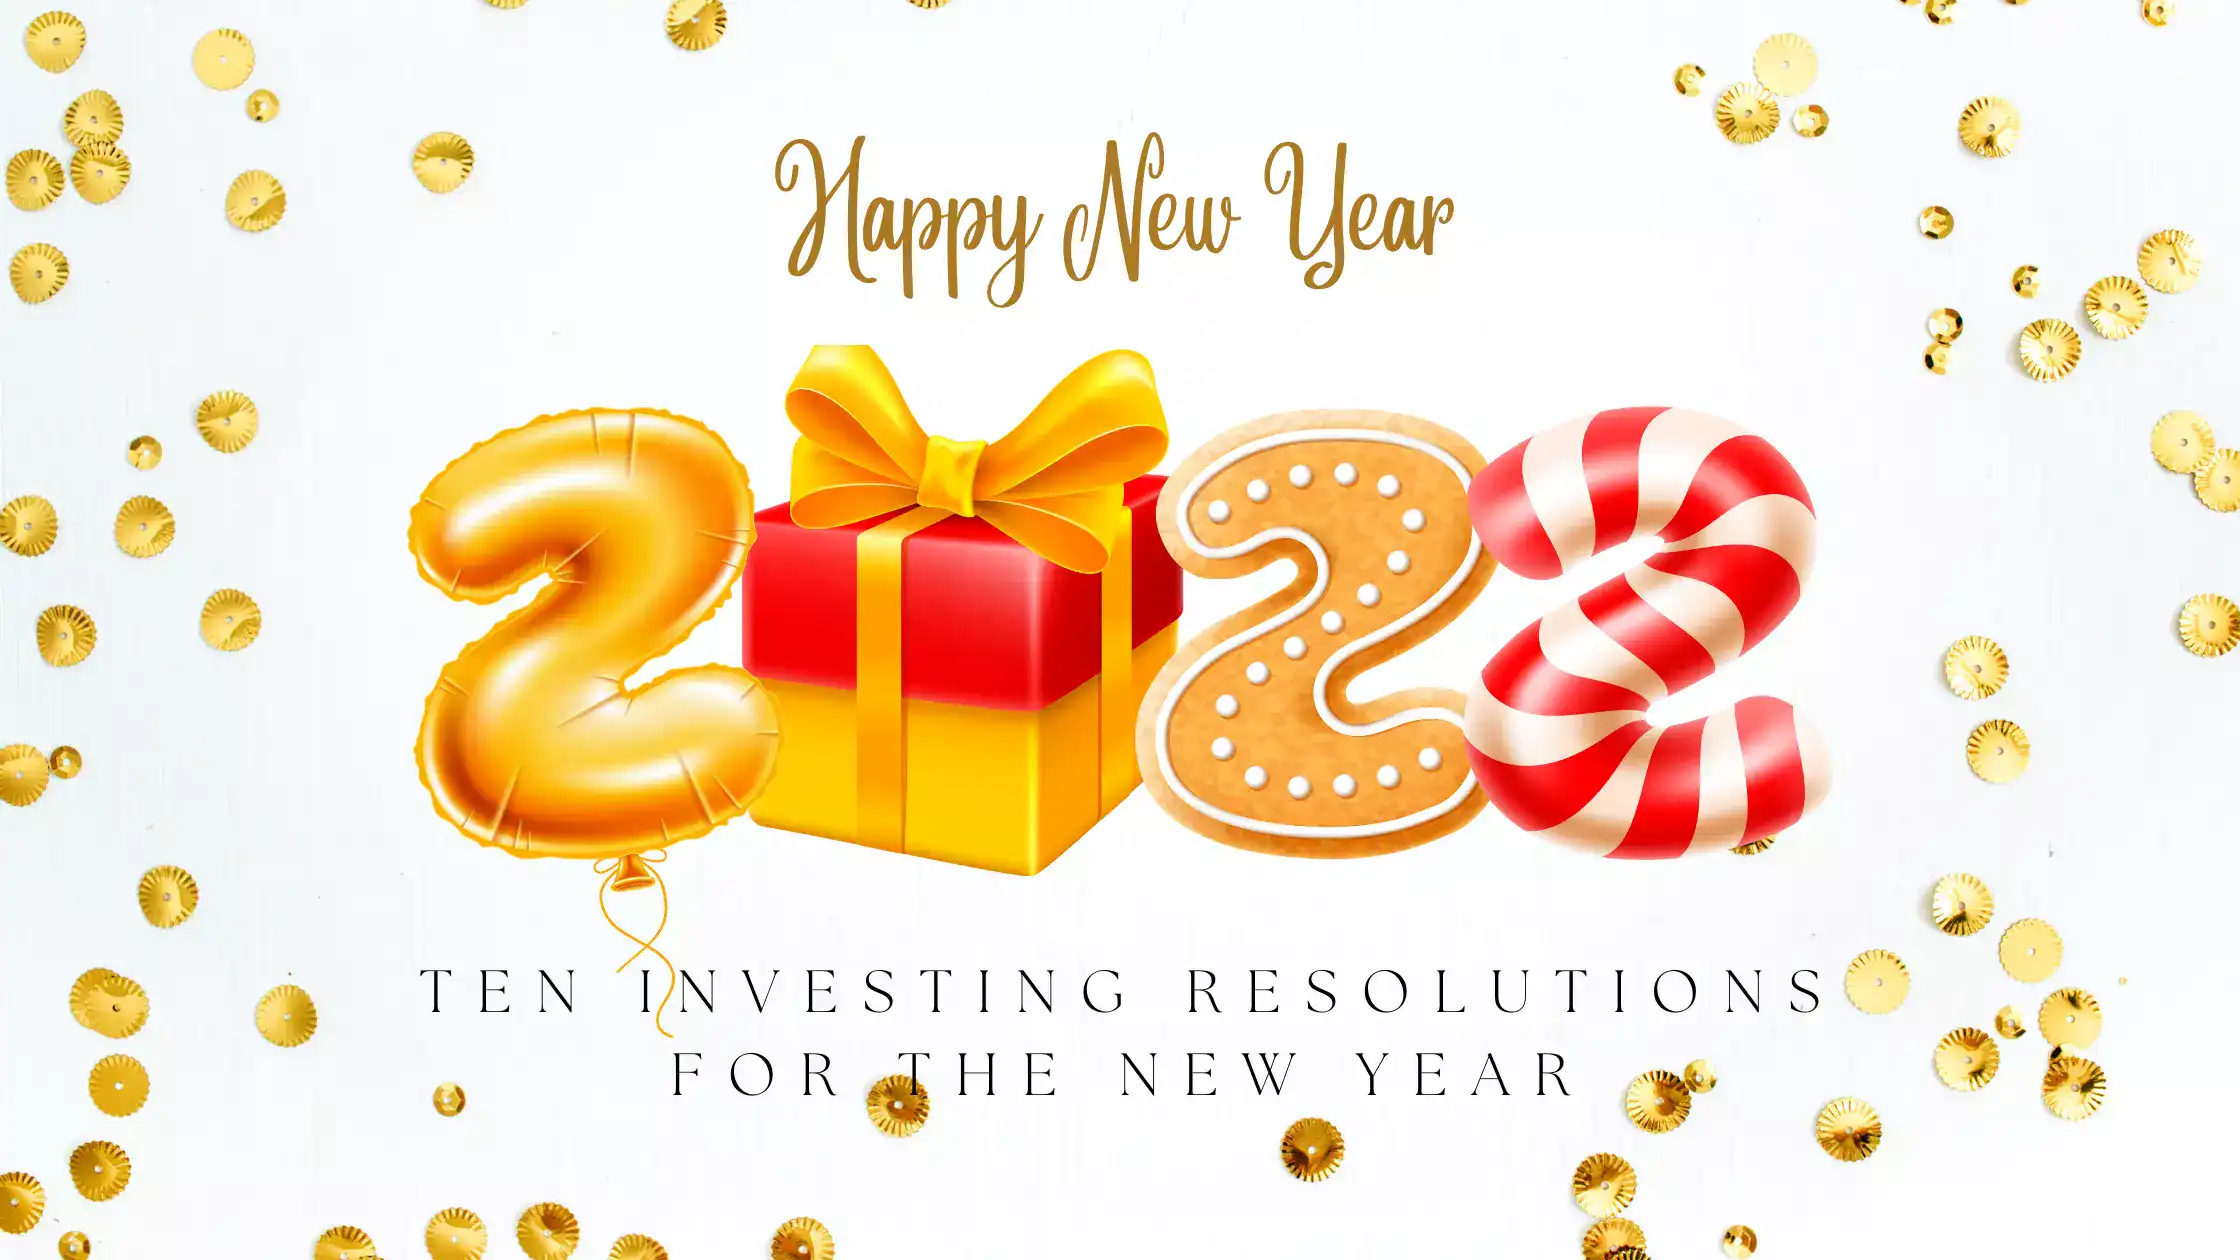 10 Investing Resolutions for 2022